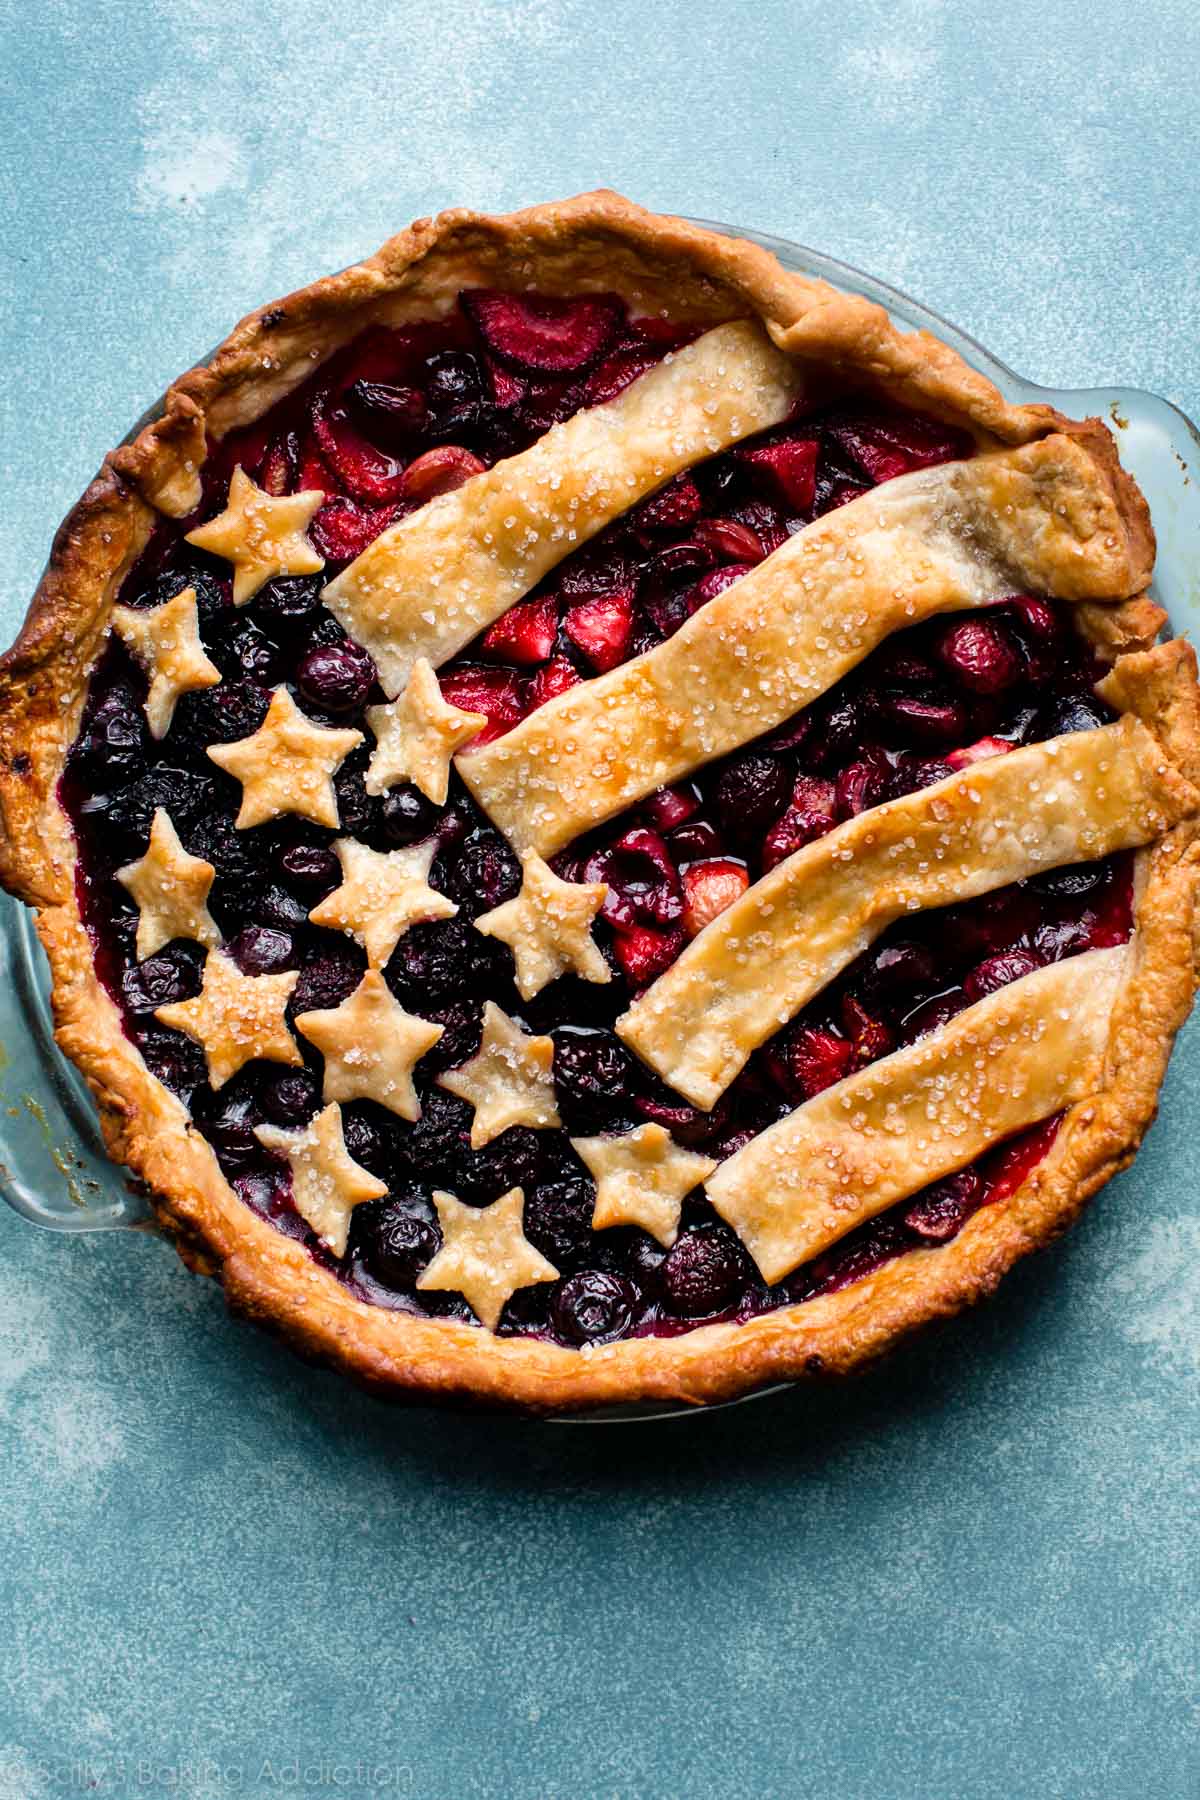 American flag pie after baking